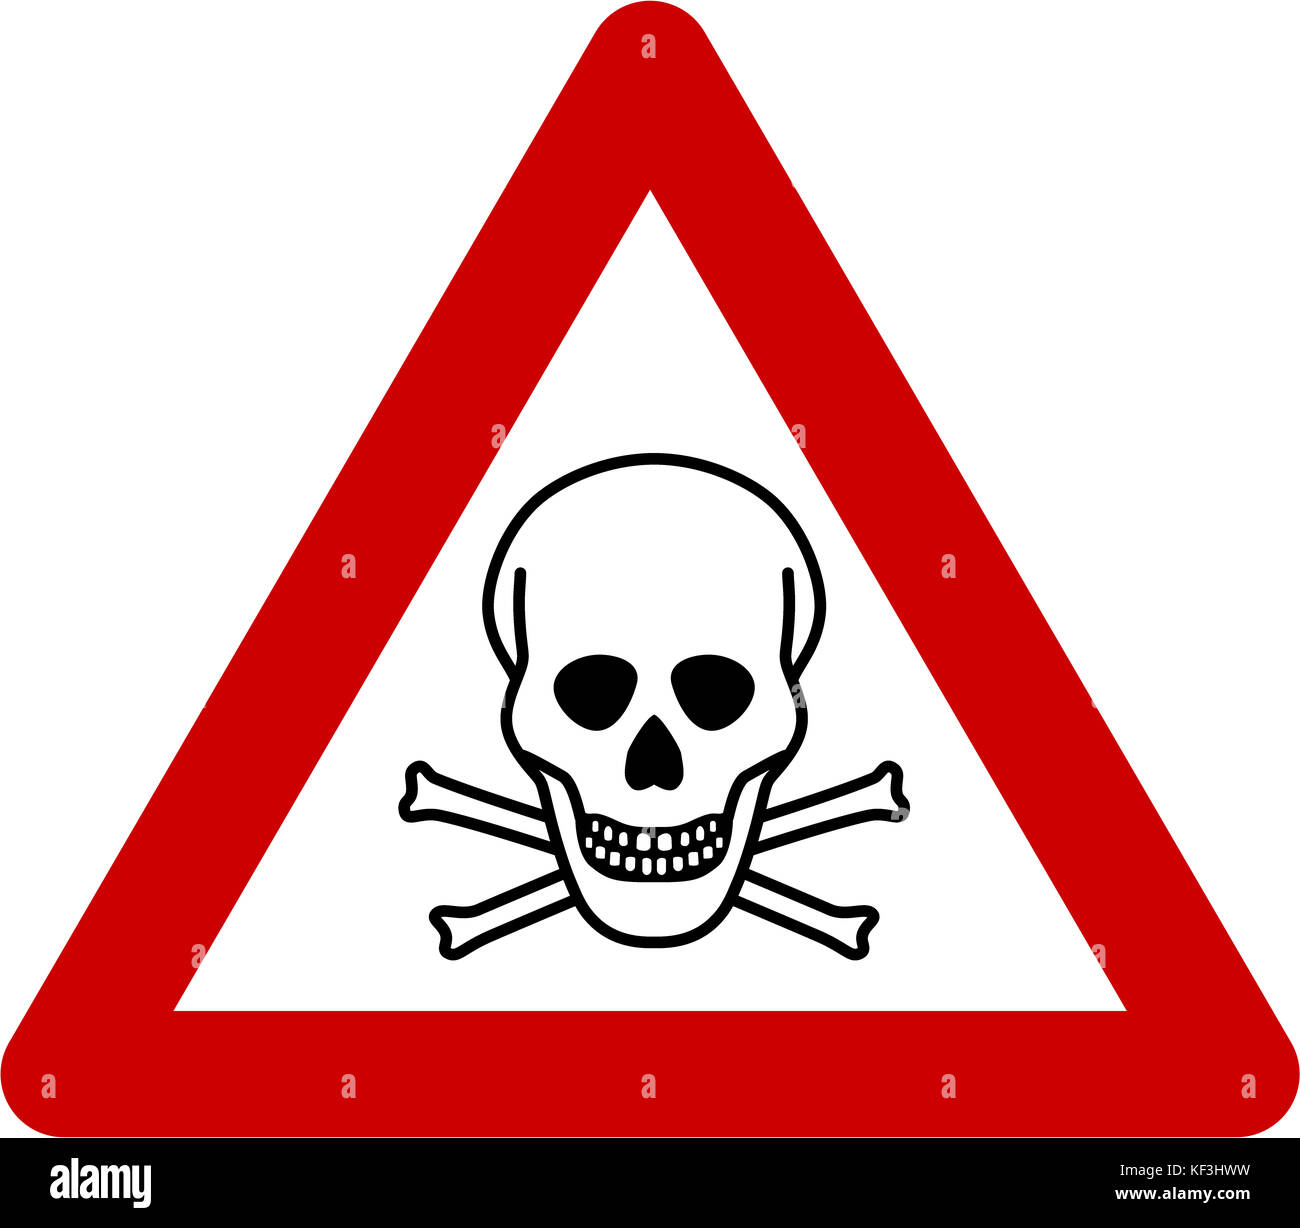 Warning sign with deadly danger symbol Stock Photo